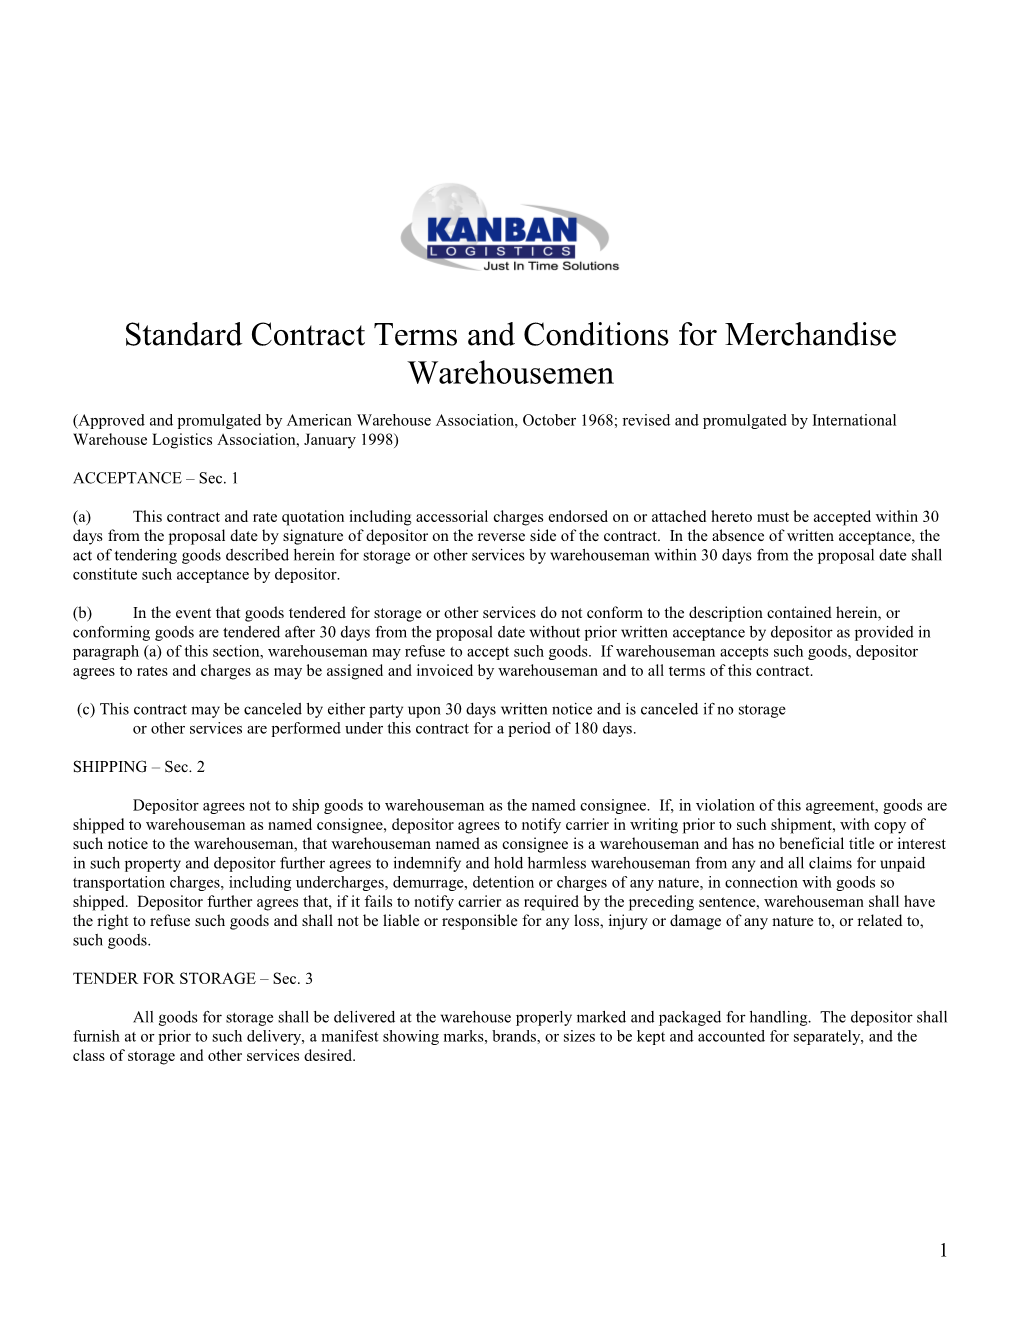 Standard Contract Terms and Conditions for Merchandise Warehousemen